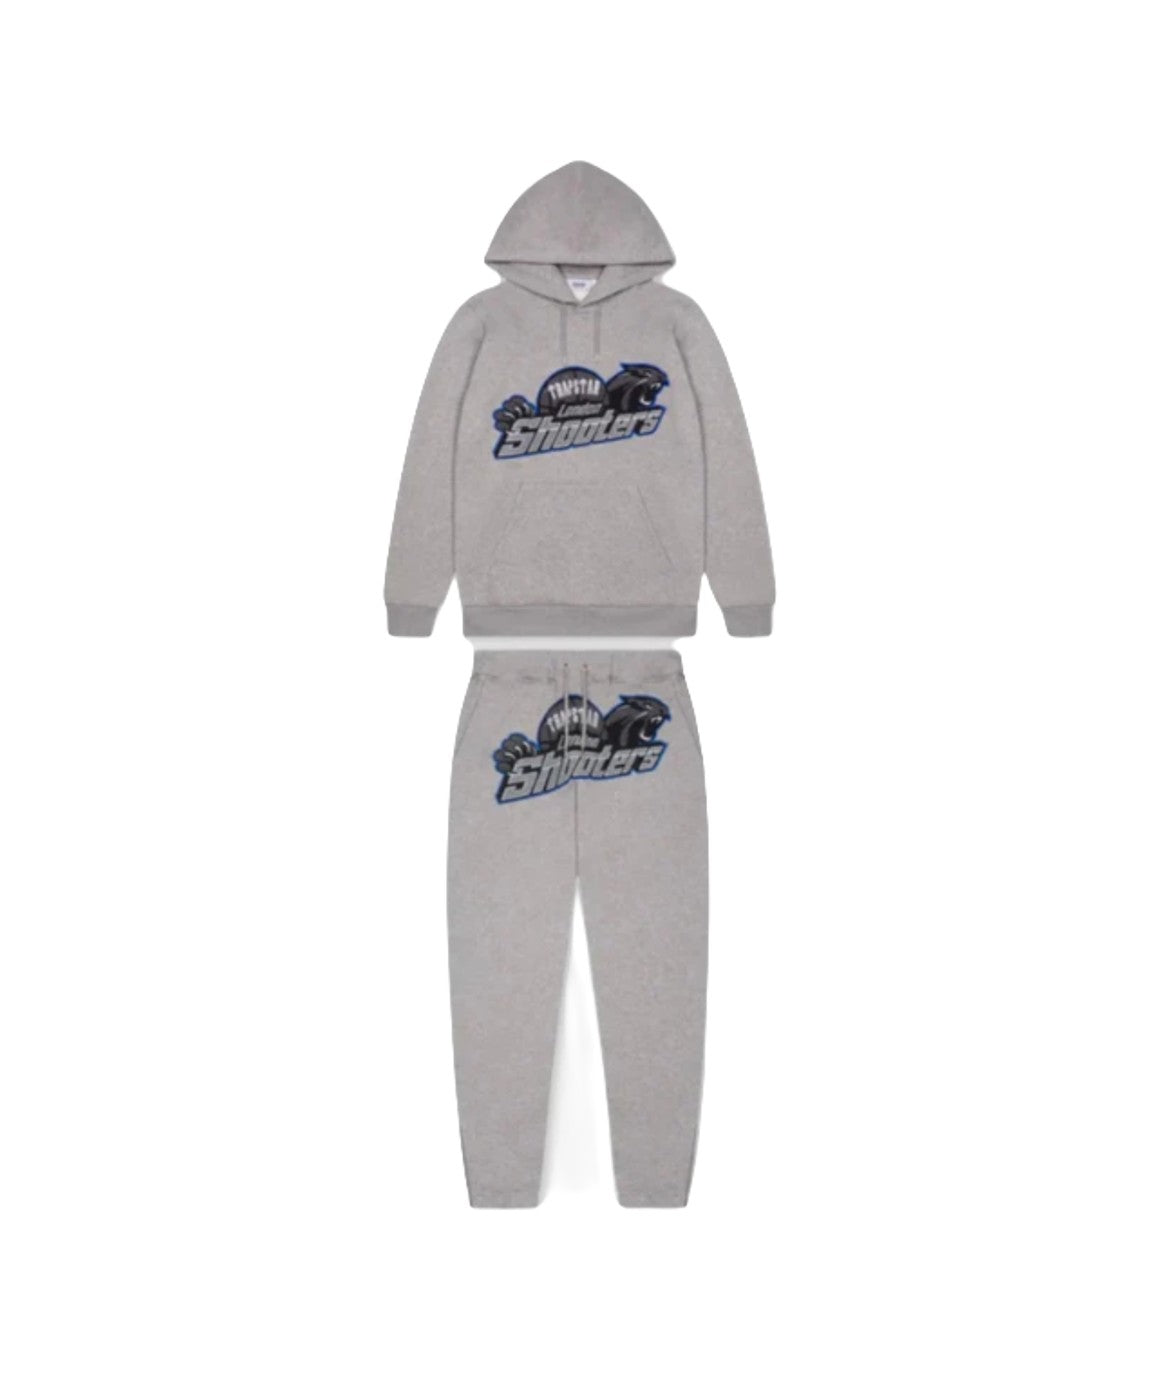 Trapstar Shooters Tracksuit - Grey Ice Flavours